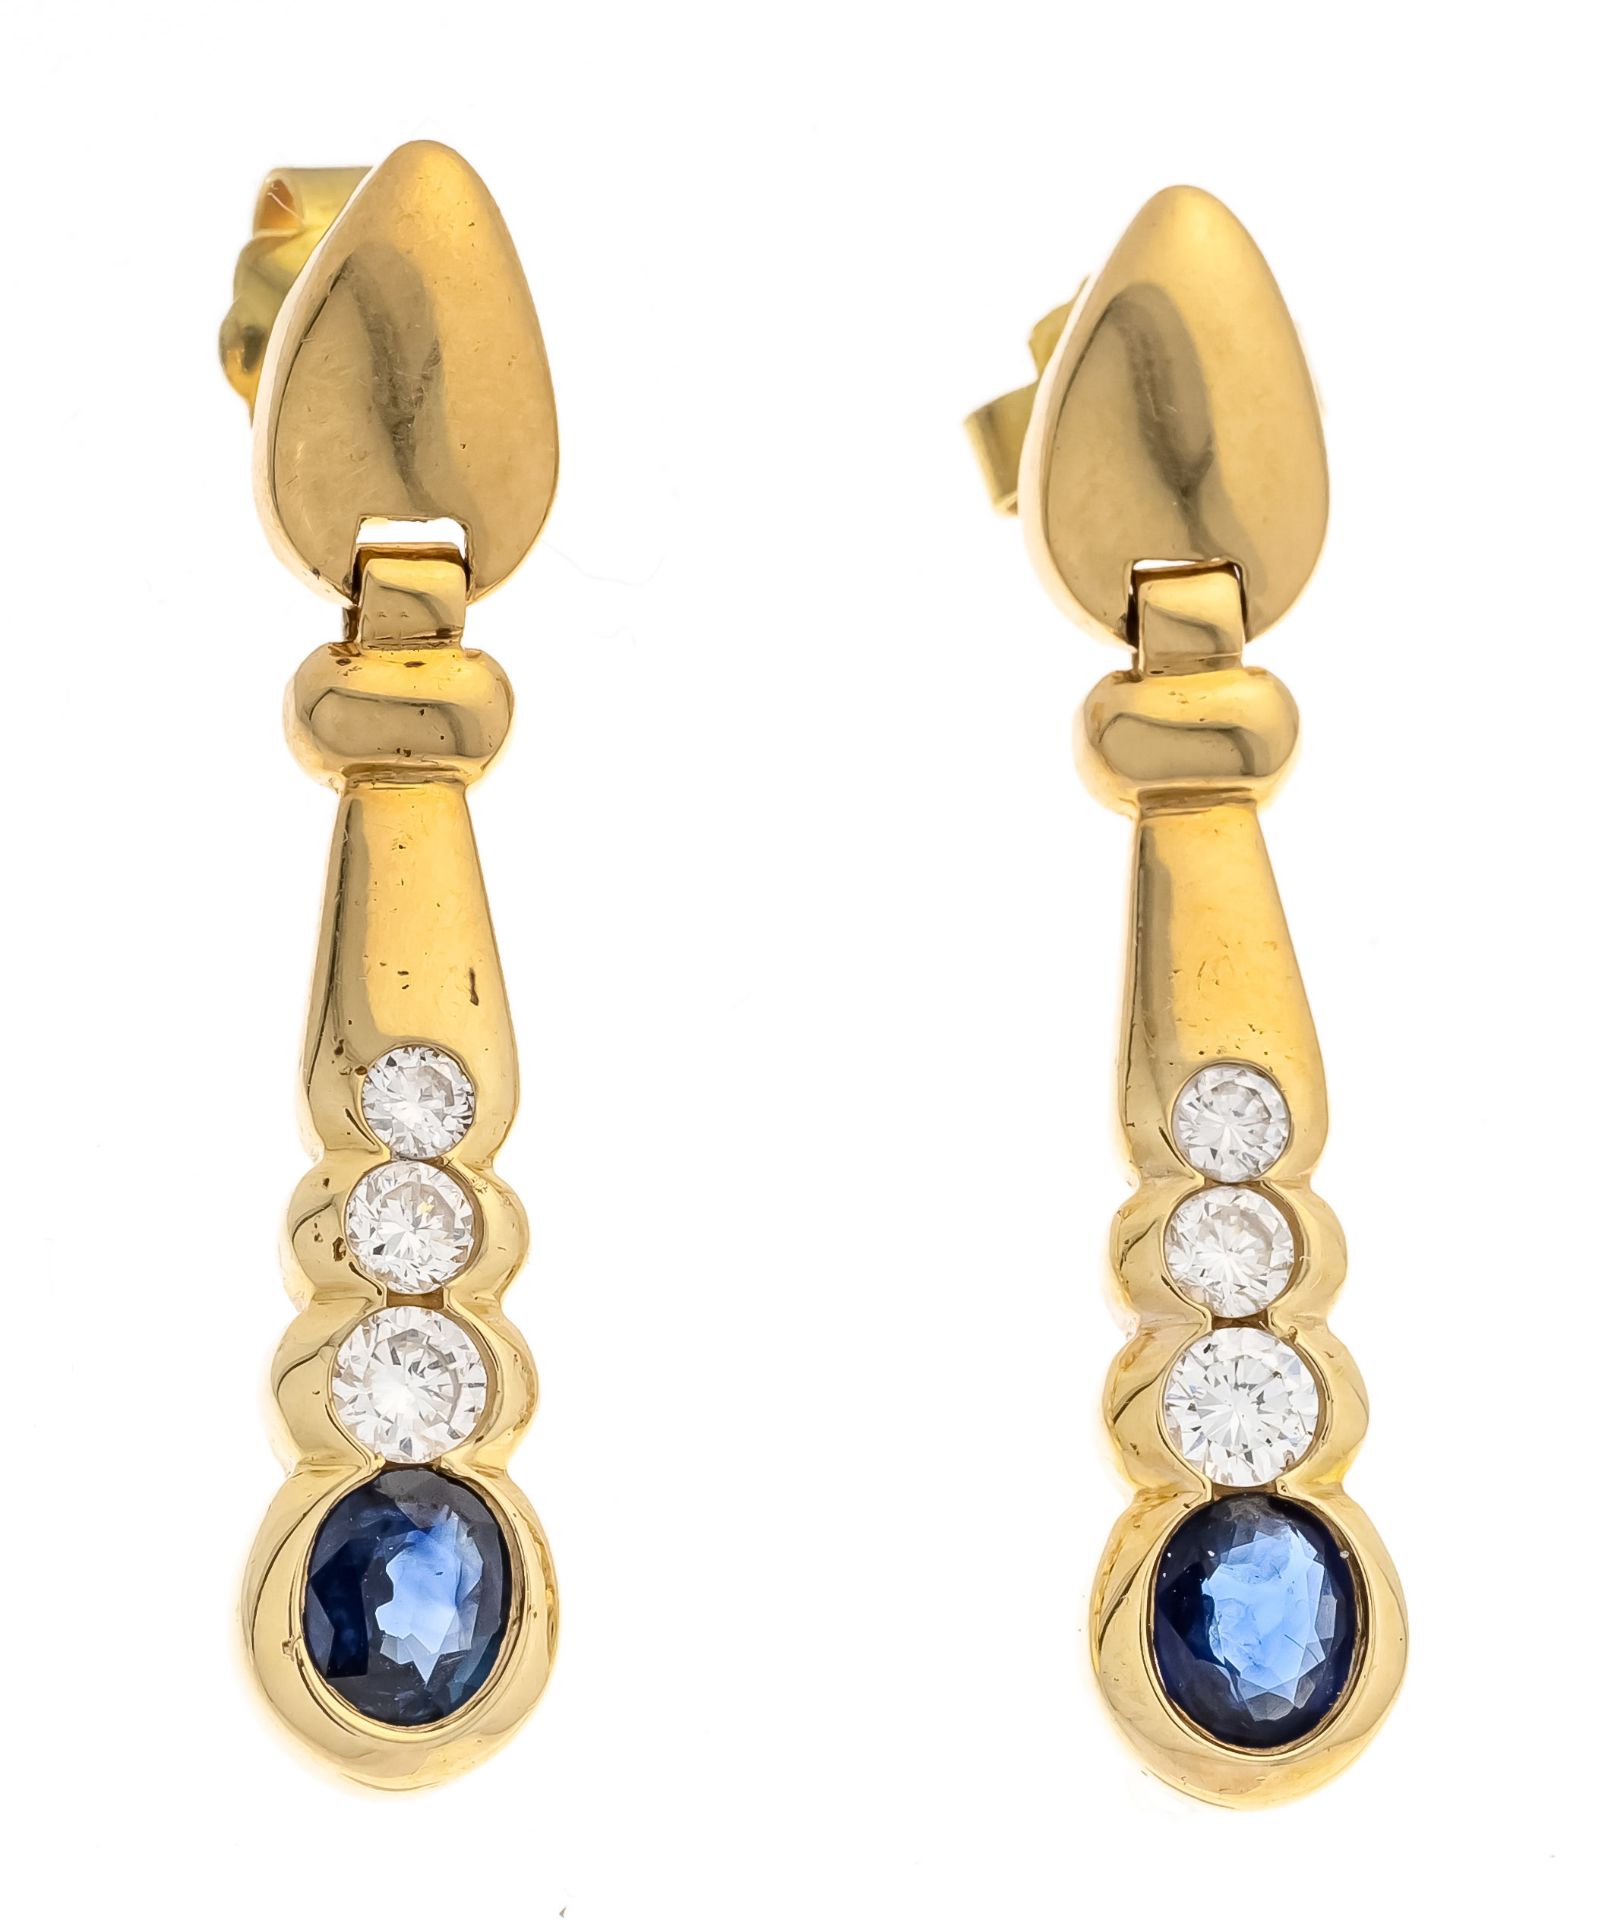 Sapphire diamond stud earrings GG 585/000 with 2 oval faceted sapphires, add. 0.76 ct blue,